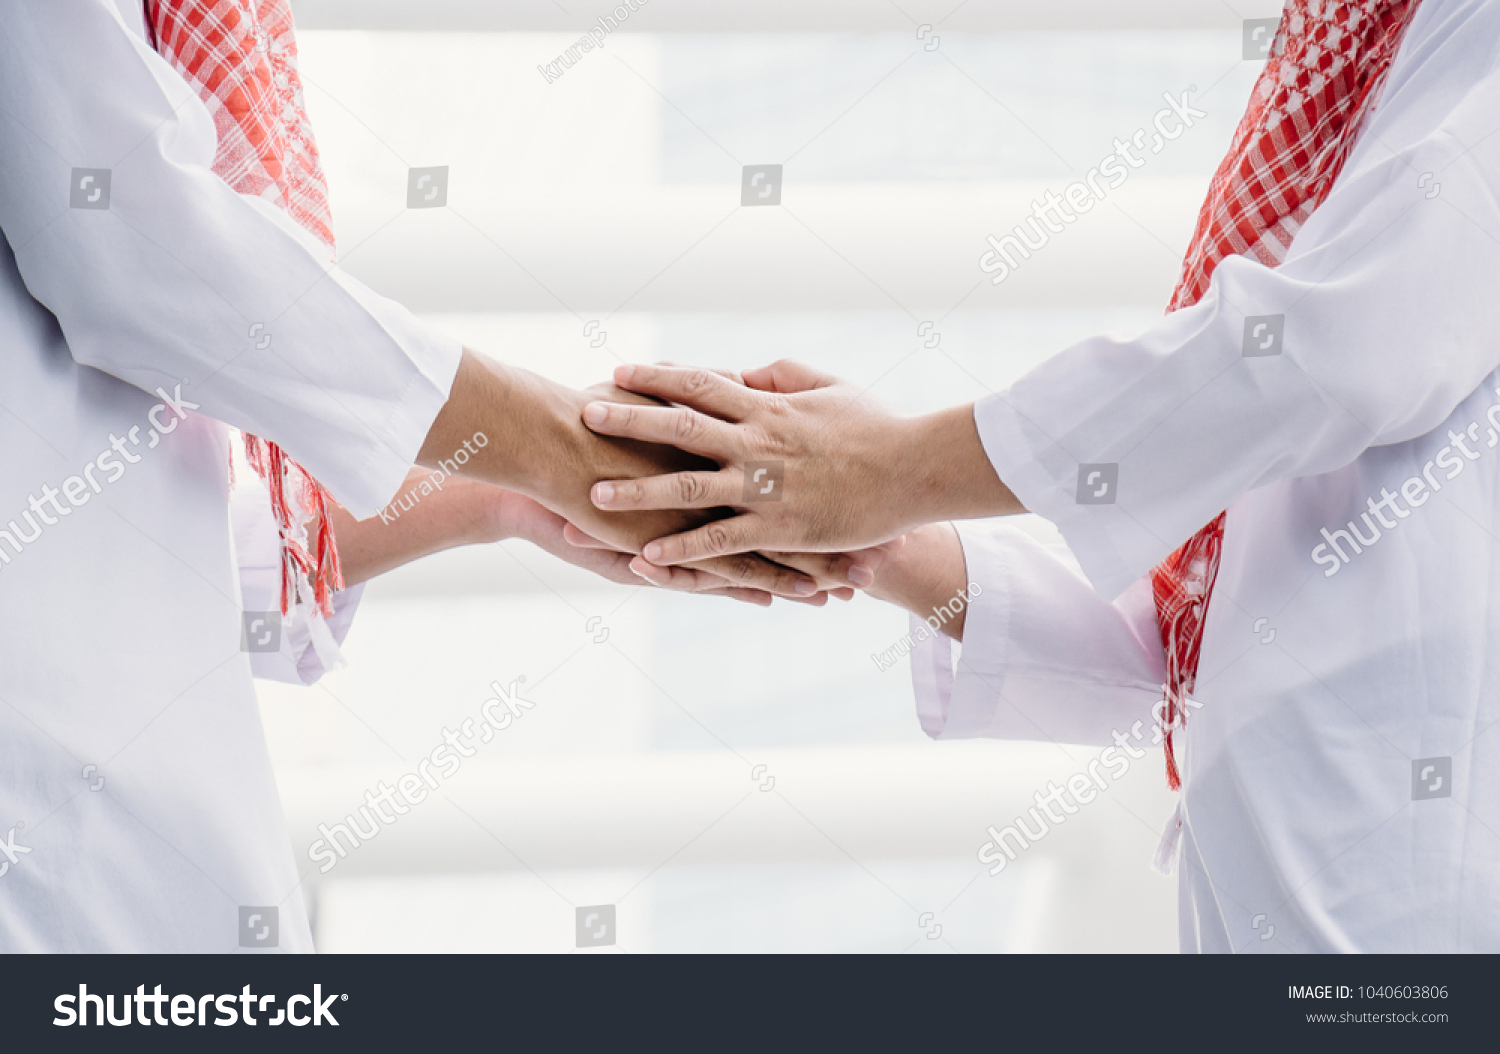 Two Arab young men are shaking hands to greet on the backdrop of a civilized city. #1040603806